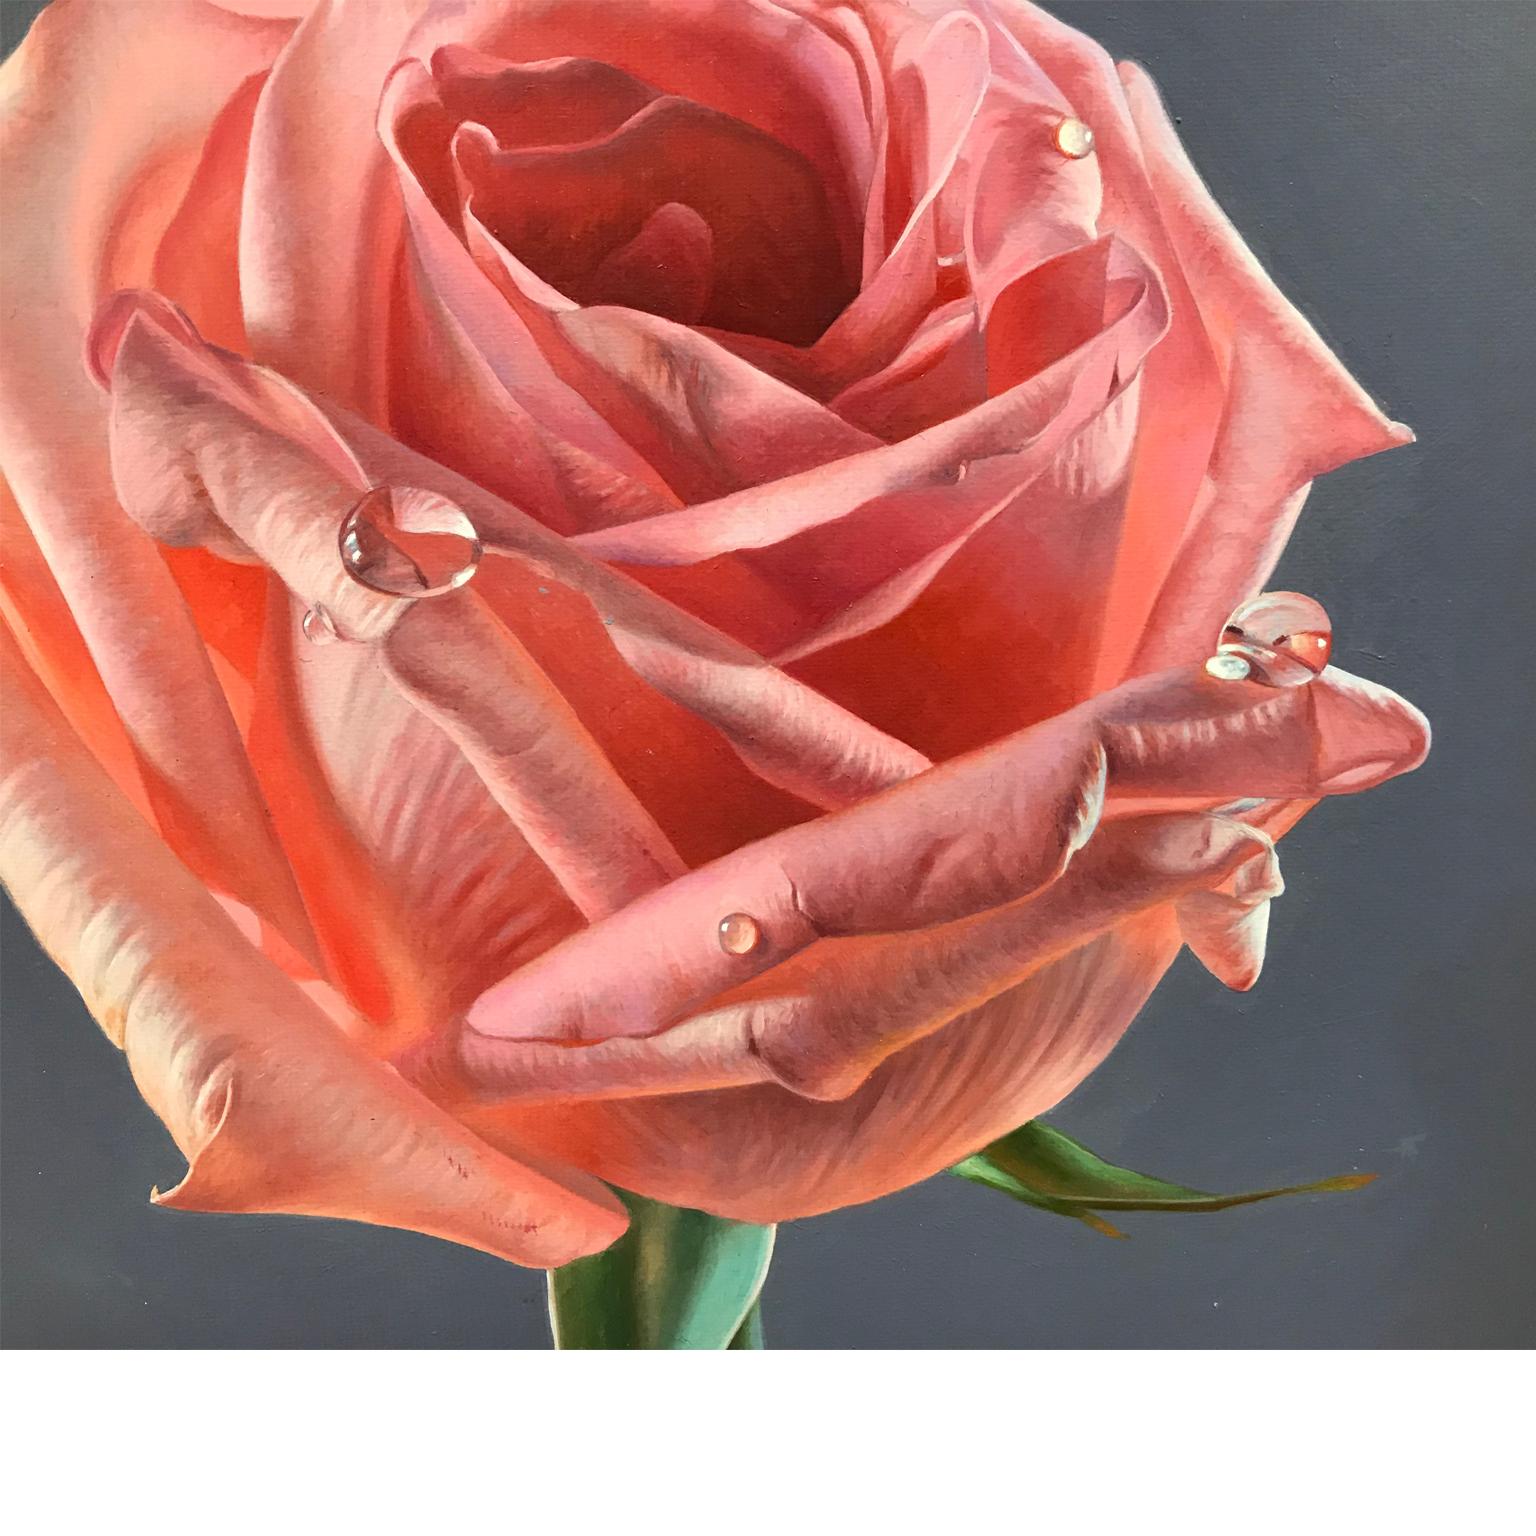 still life, roses  - Painting by Manolo Higueras